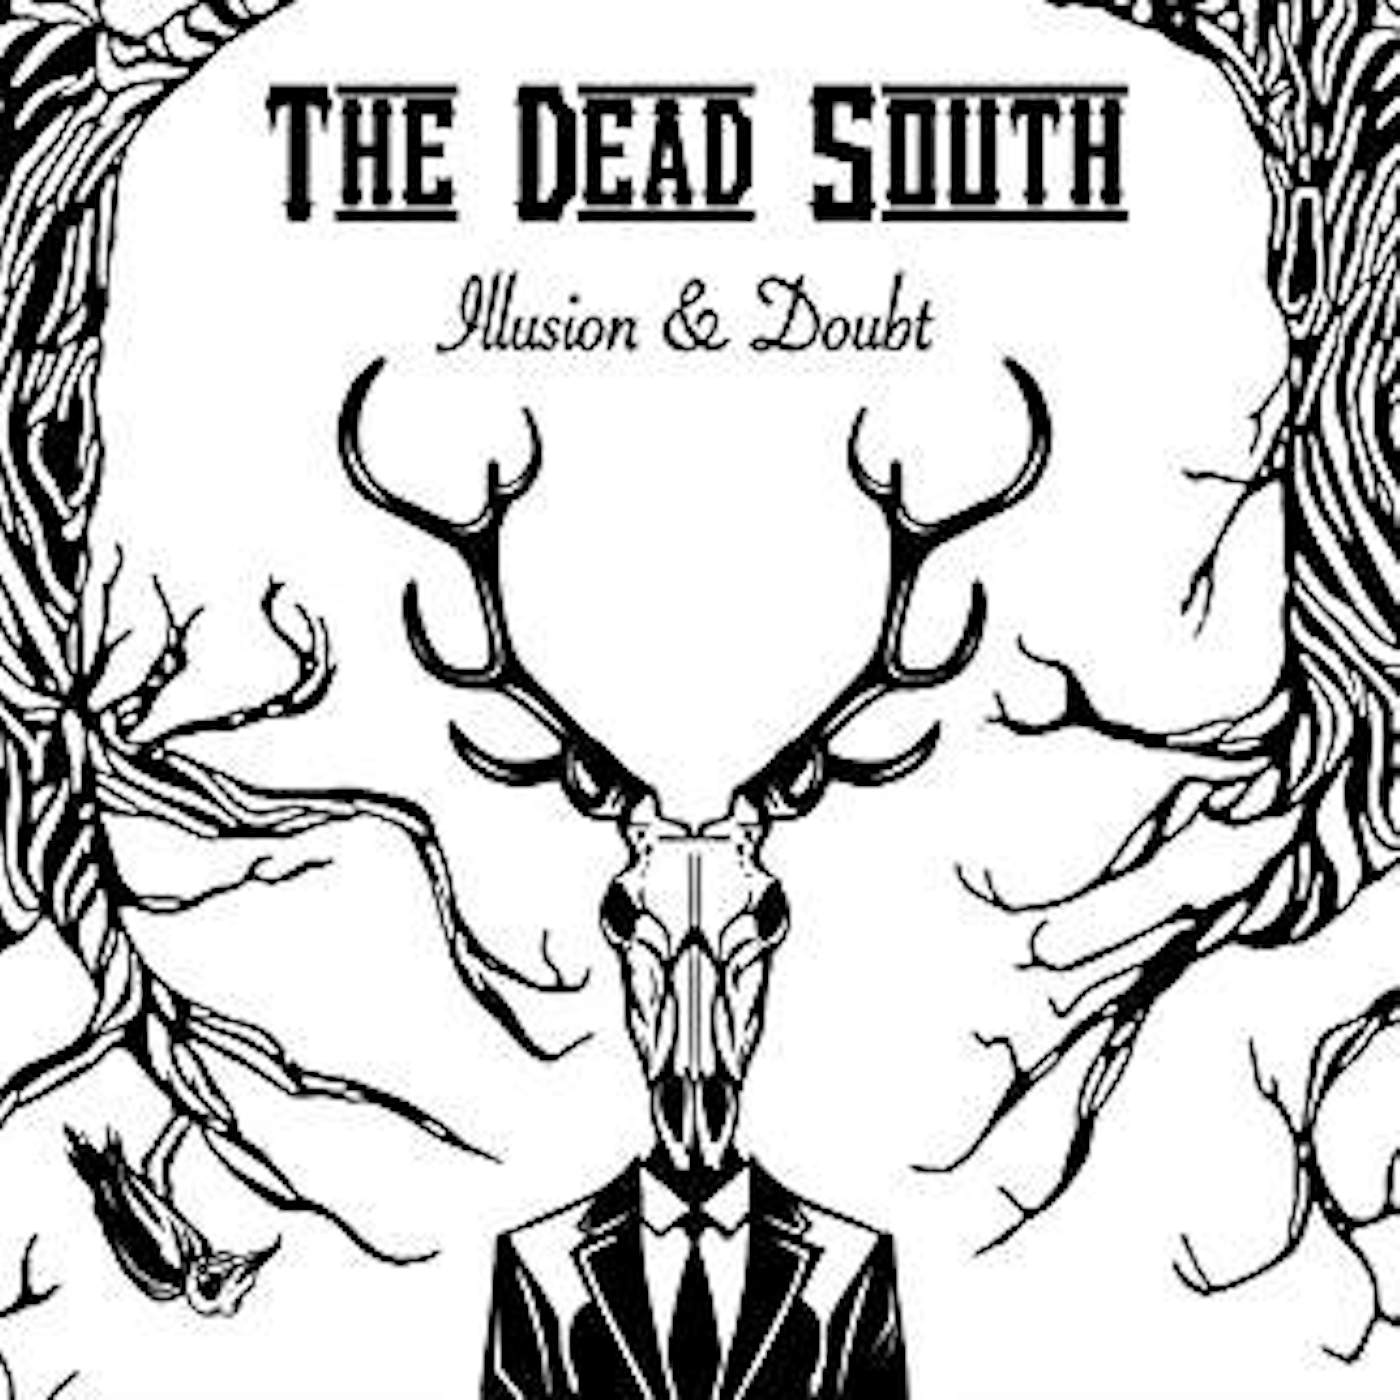 The Dead South Illusion & Doubt Vinyl Record